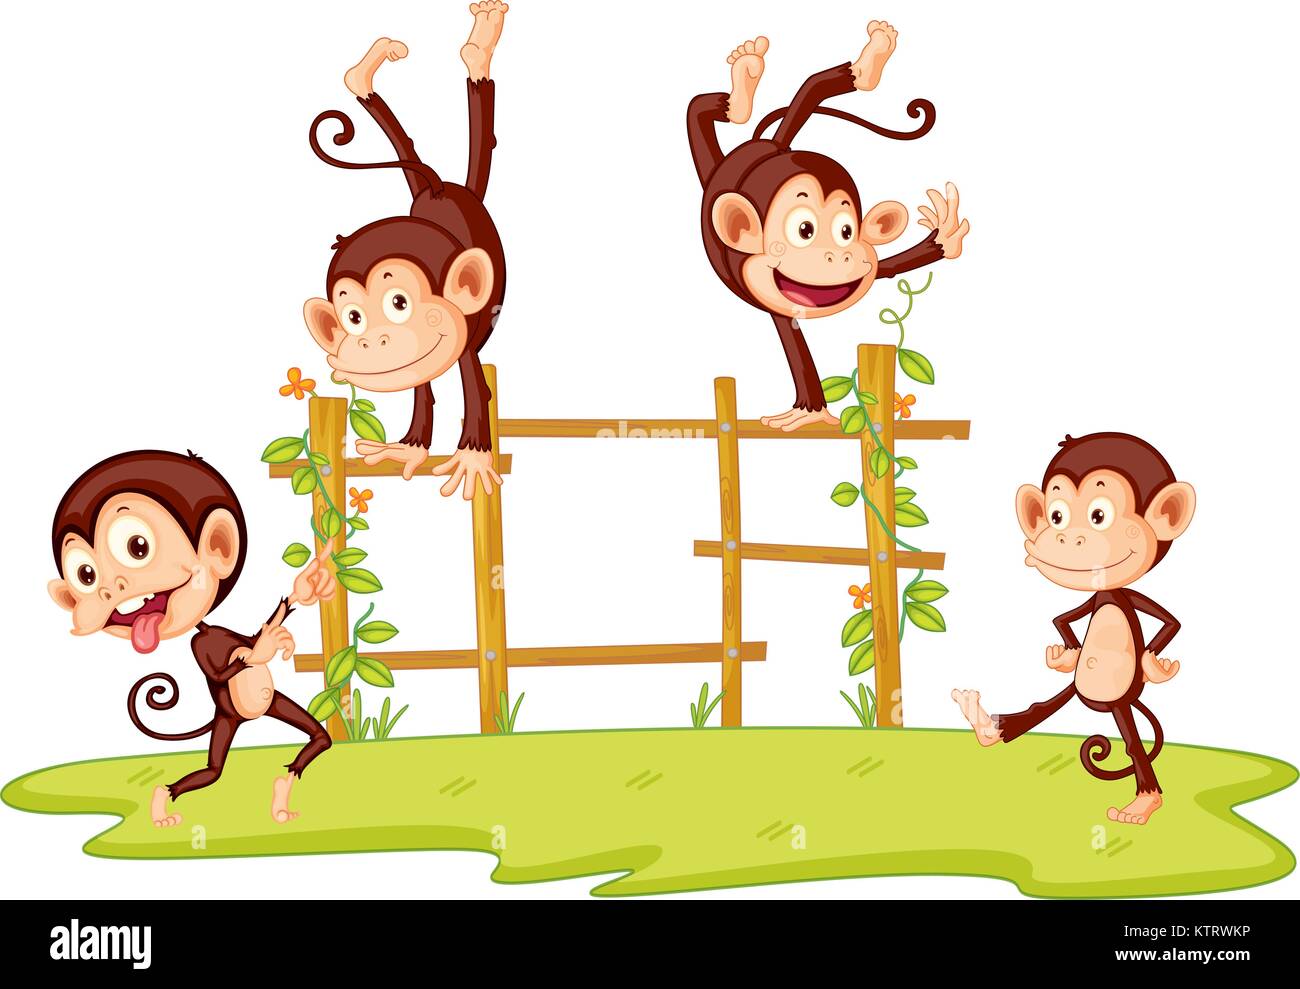 Illustration of monkeys playing on fence Stock Vector